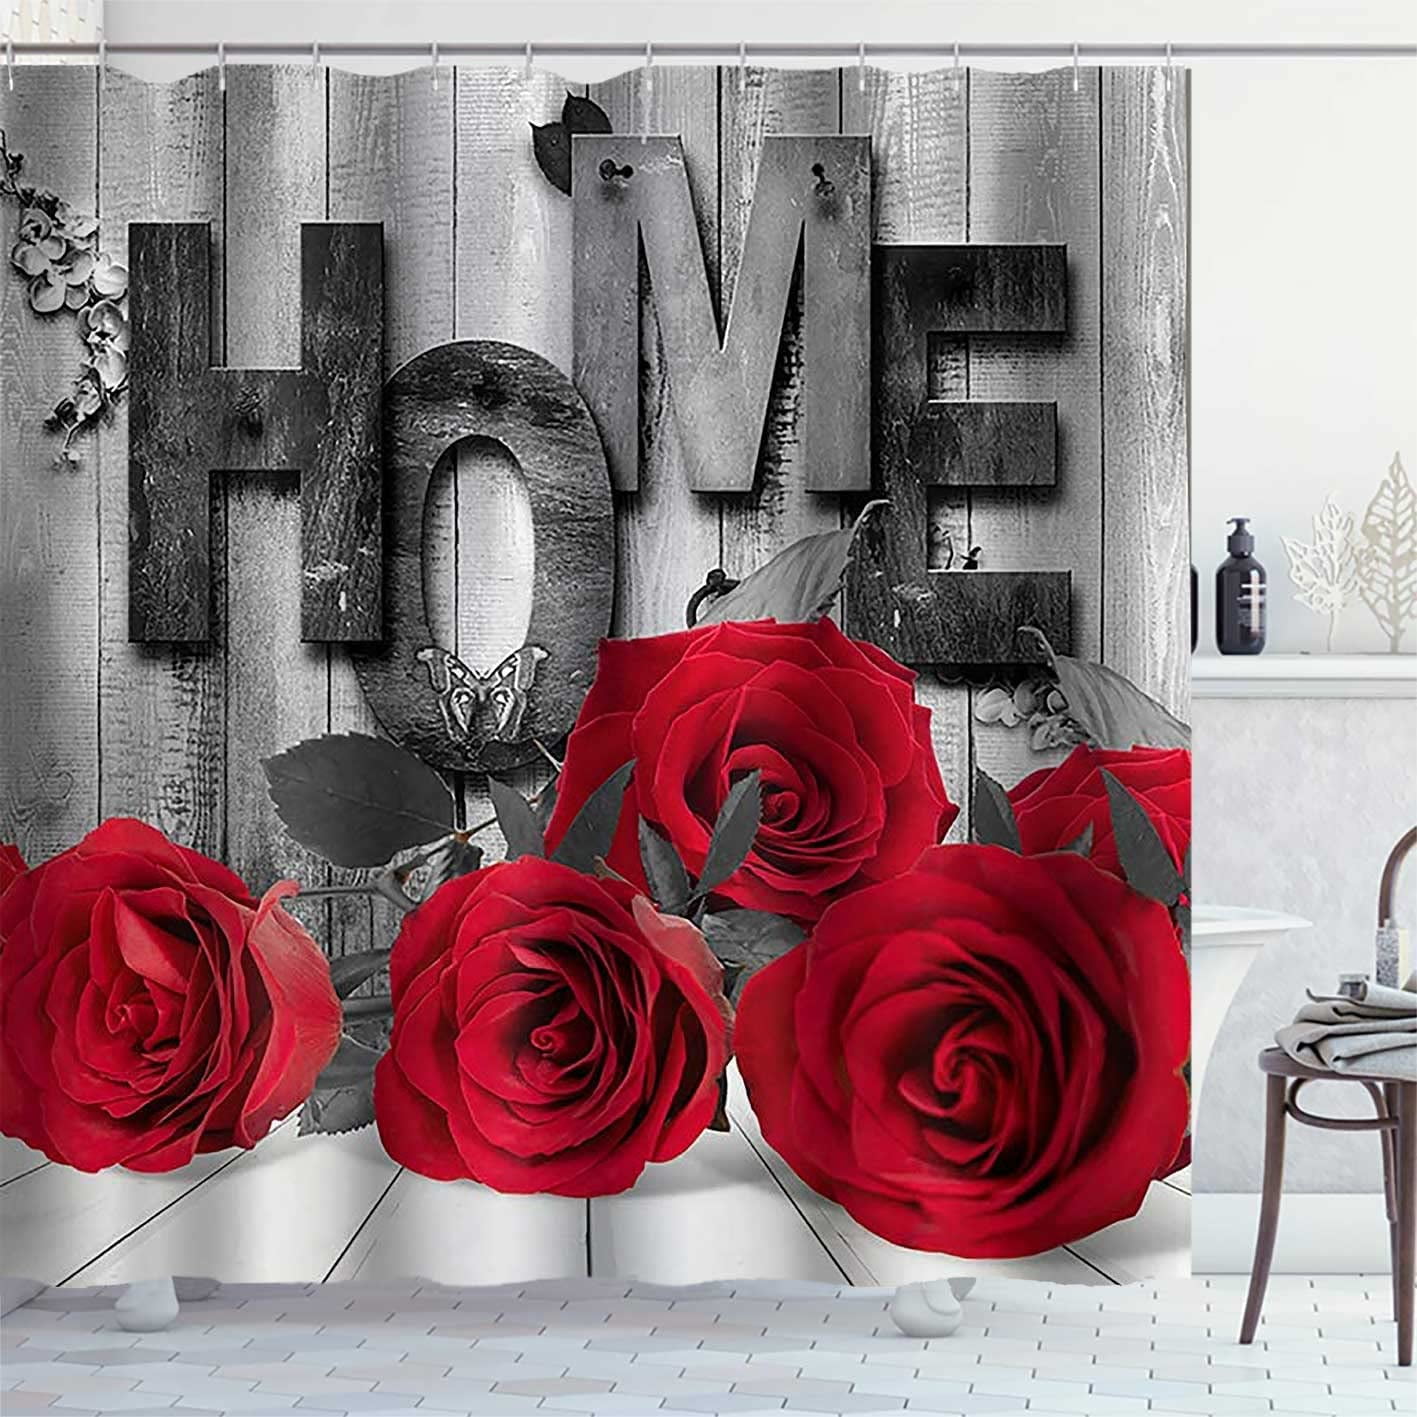 SPXUBZ Shower Curtain, Black and White Wood Panel Home Bright Red Rose  60x72 Inch Shower Curtain for Home Bathroom Waterproof Holiday Decoration 